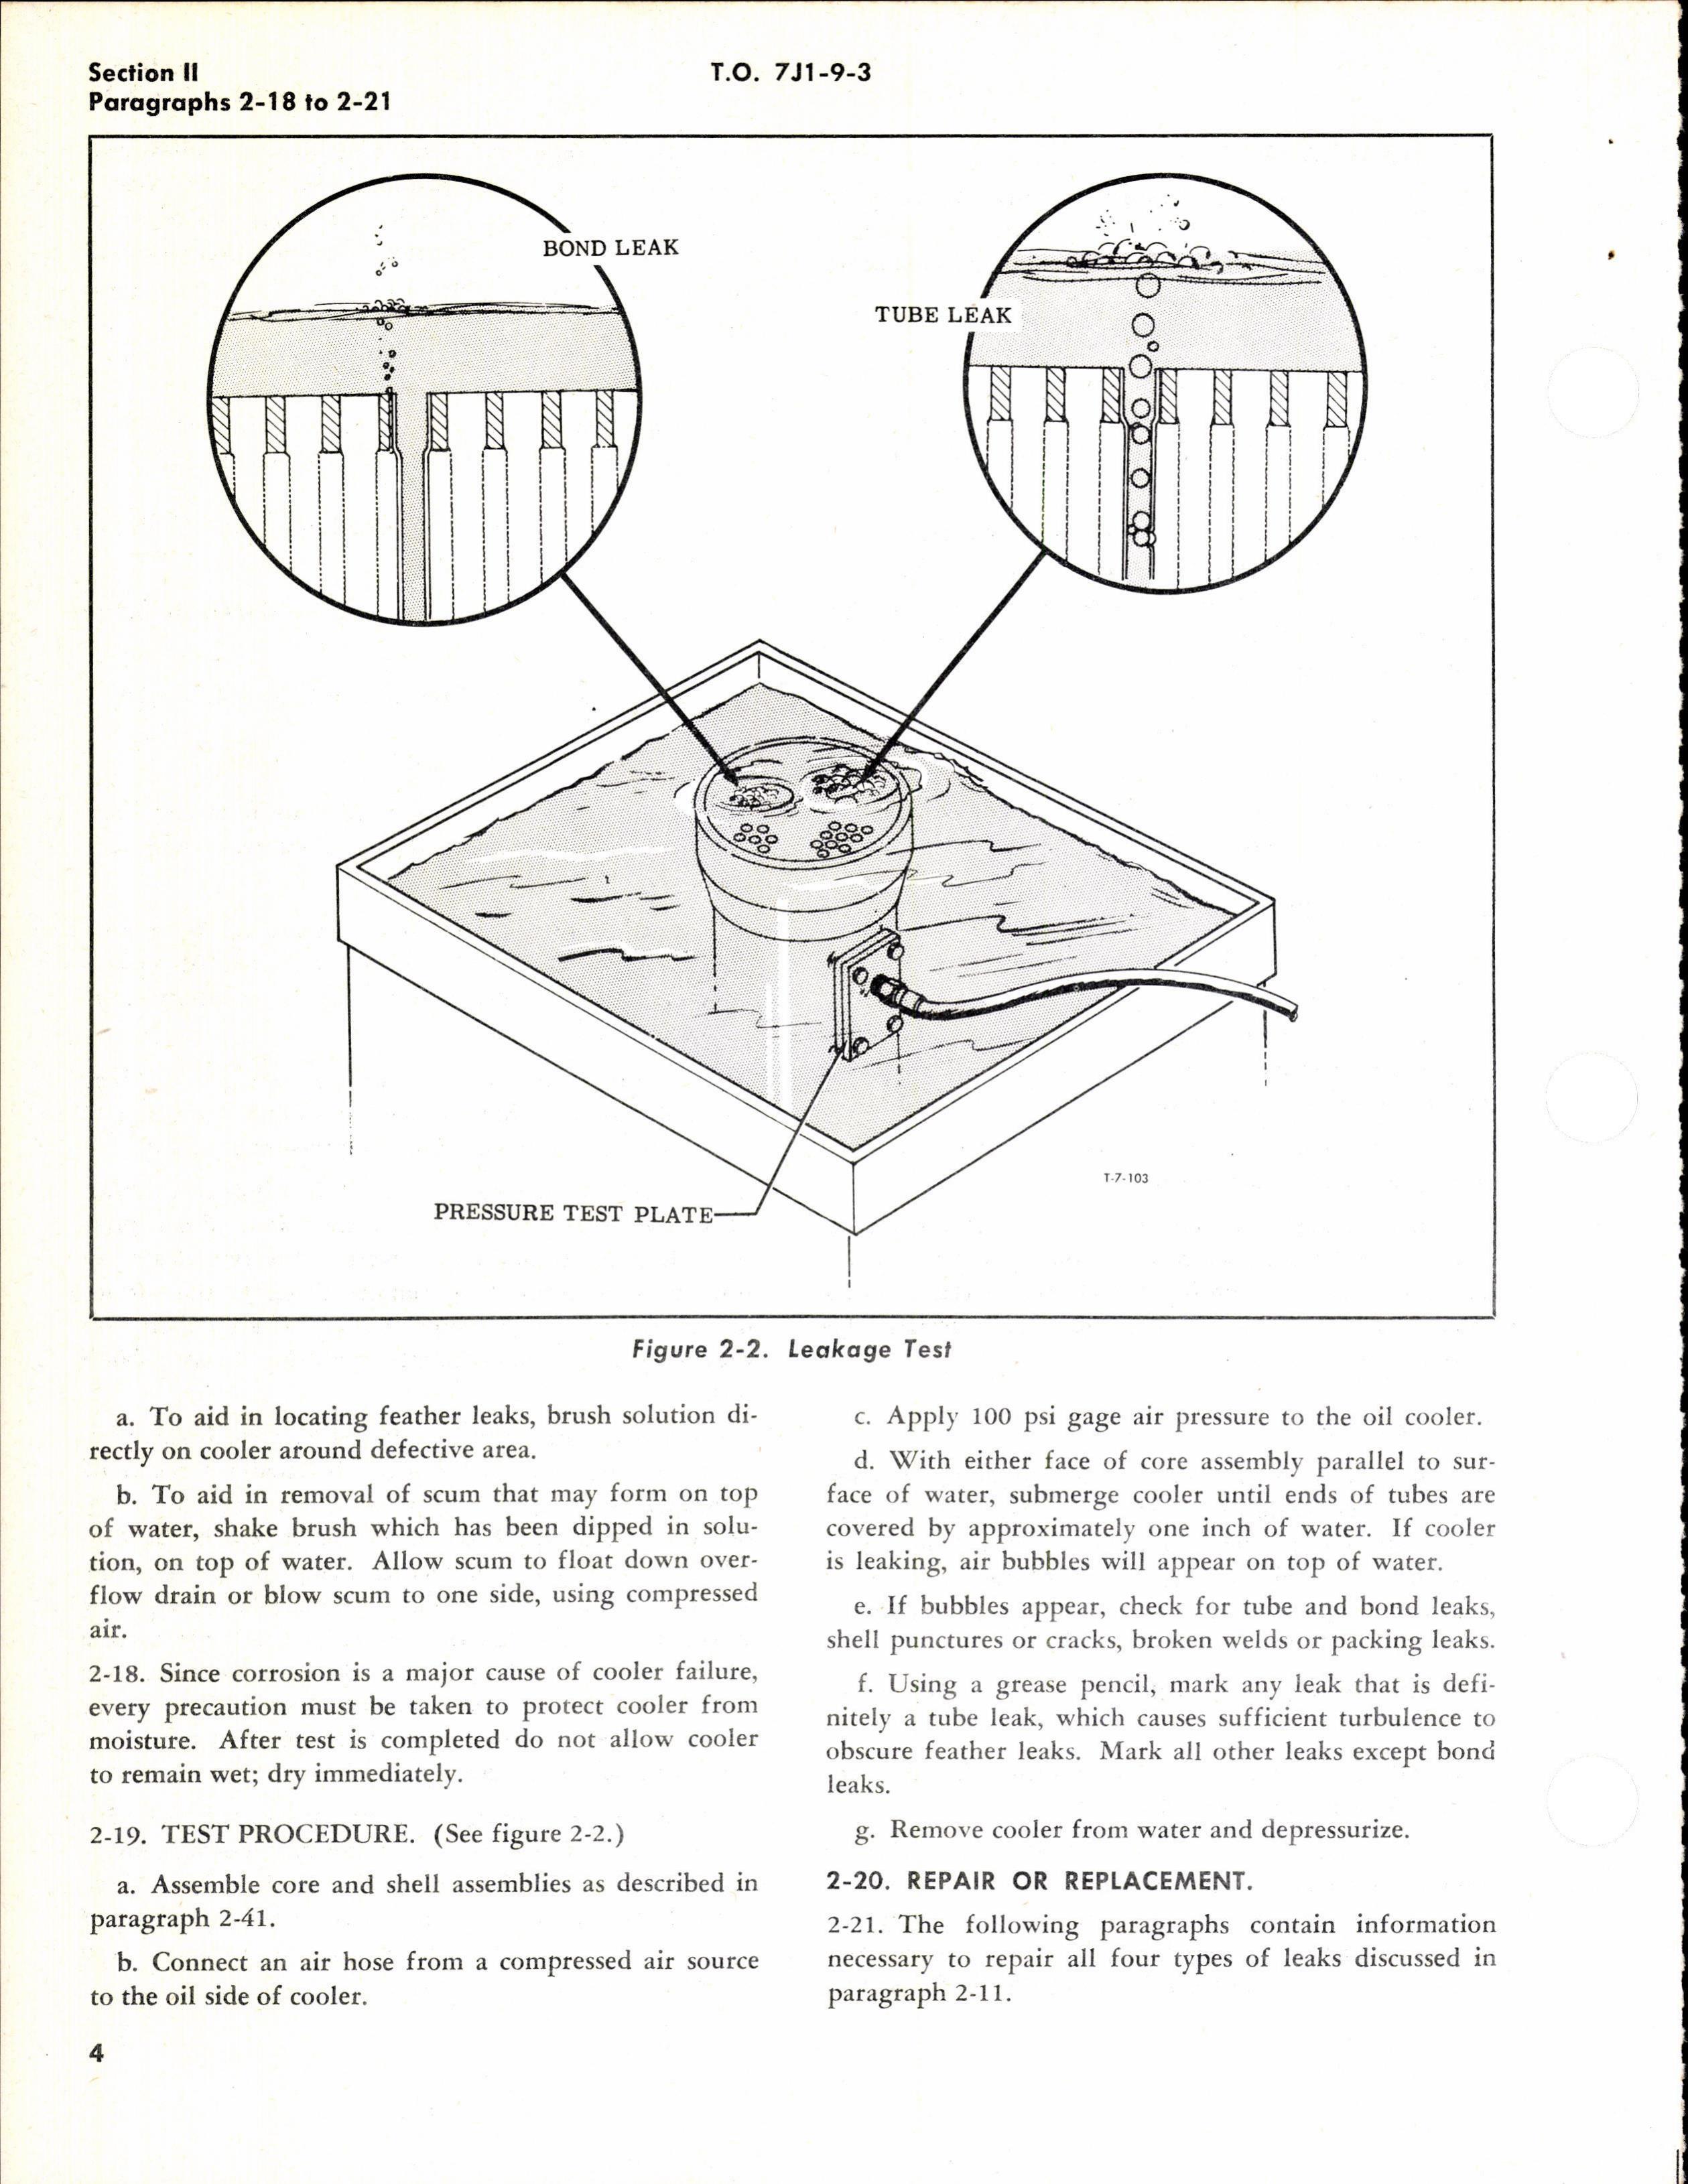 Sample page 8 from AirCorps Library document: Handbook Overhaul Instructions for Oil Coolers